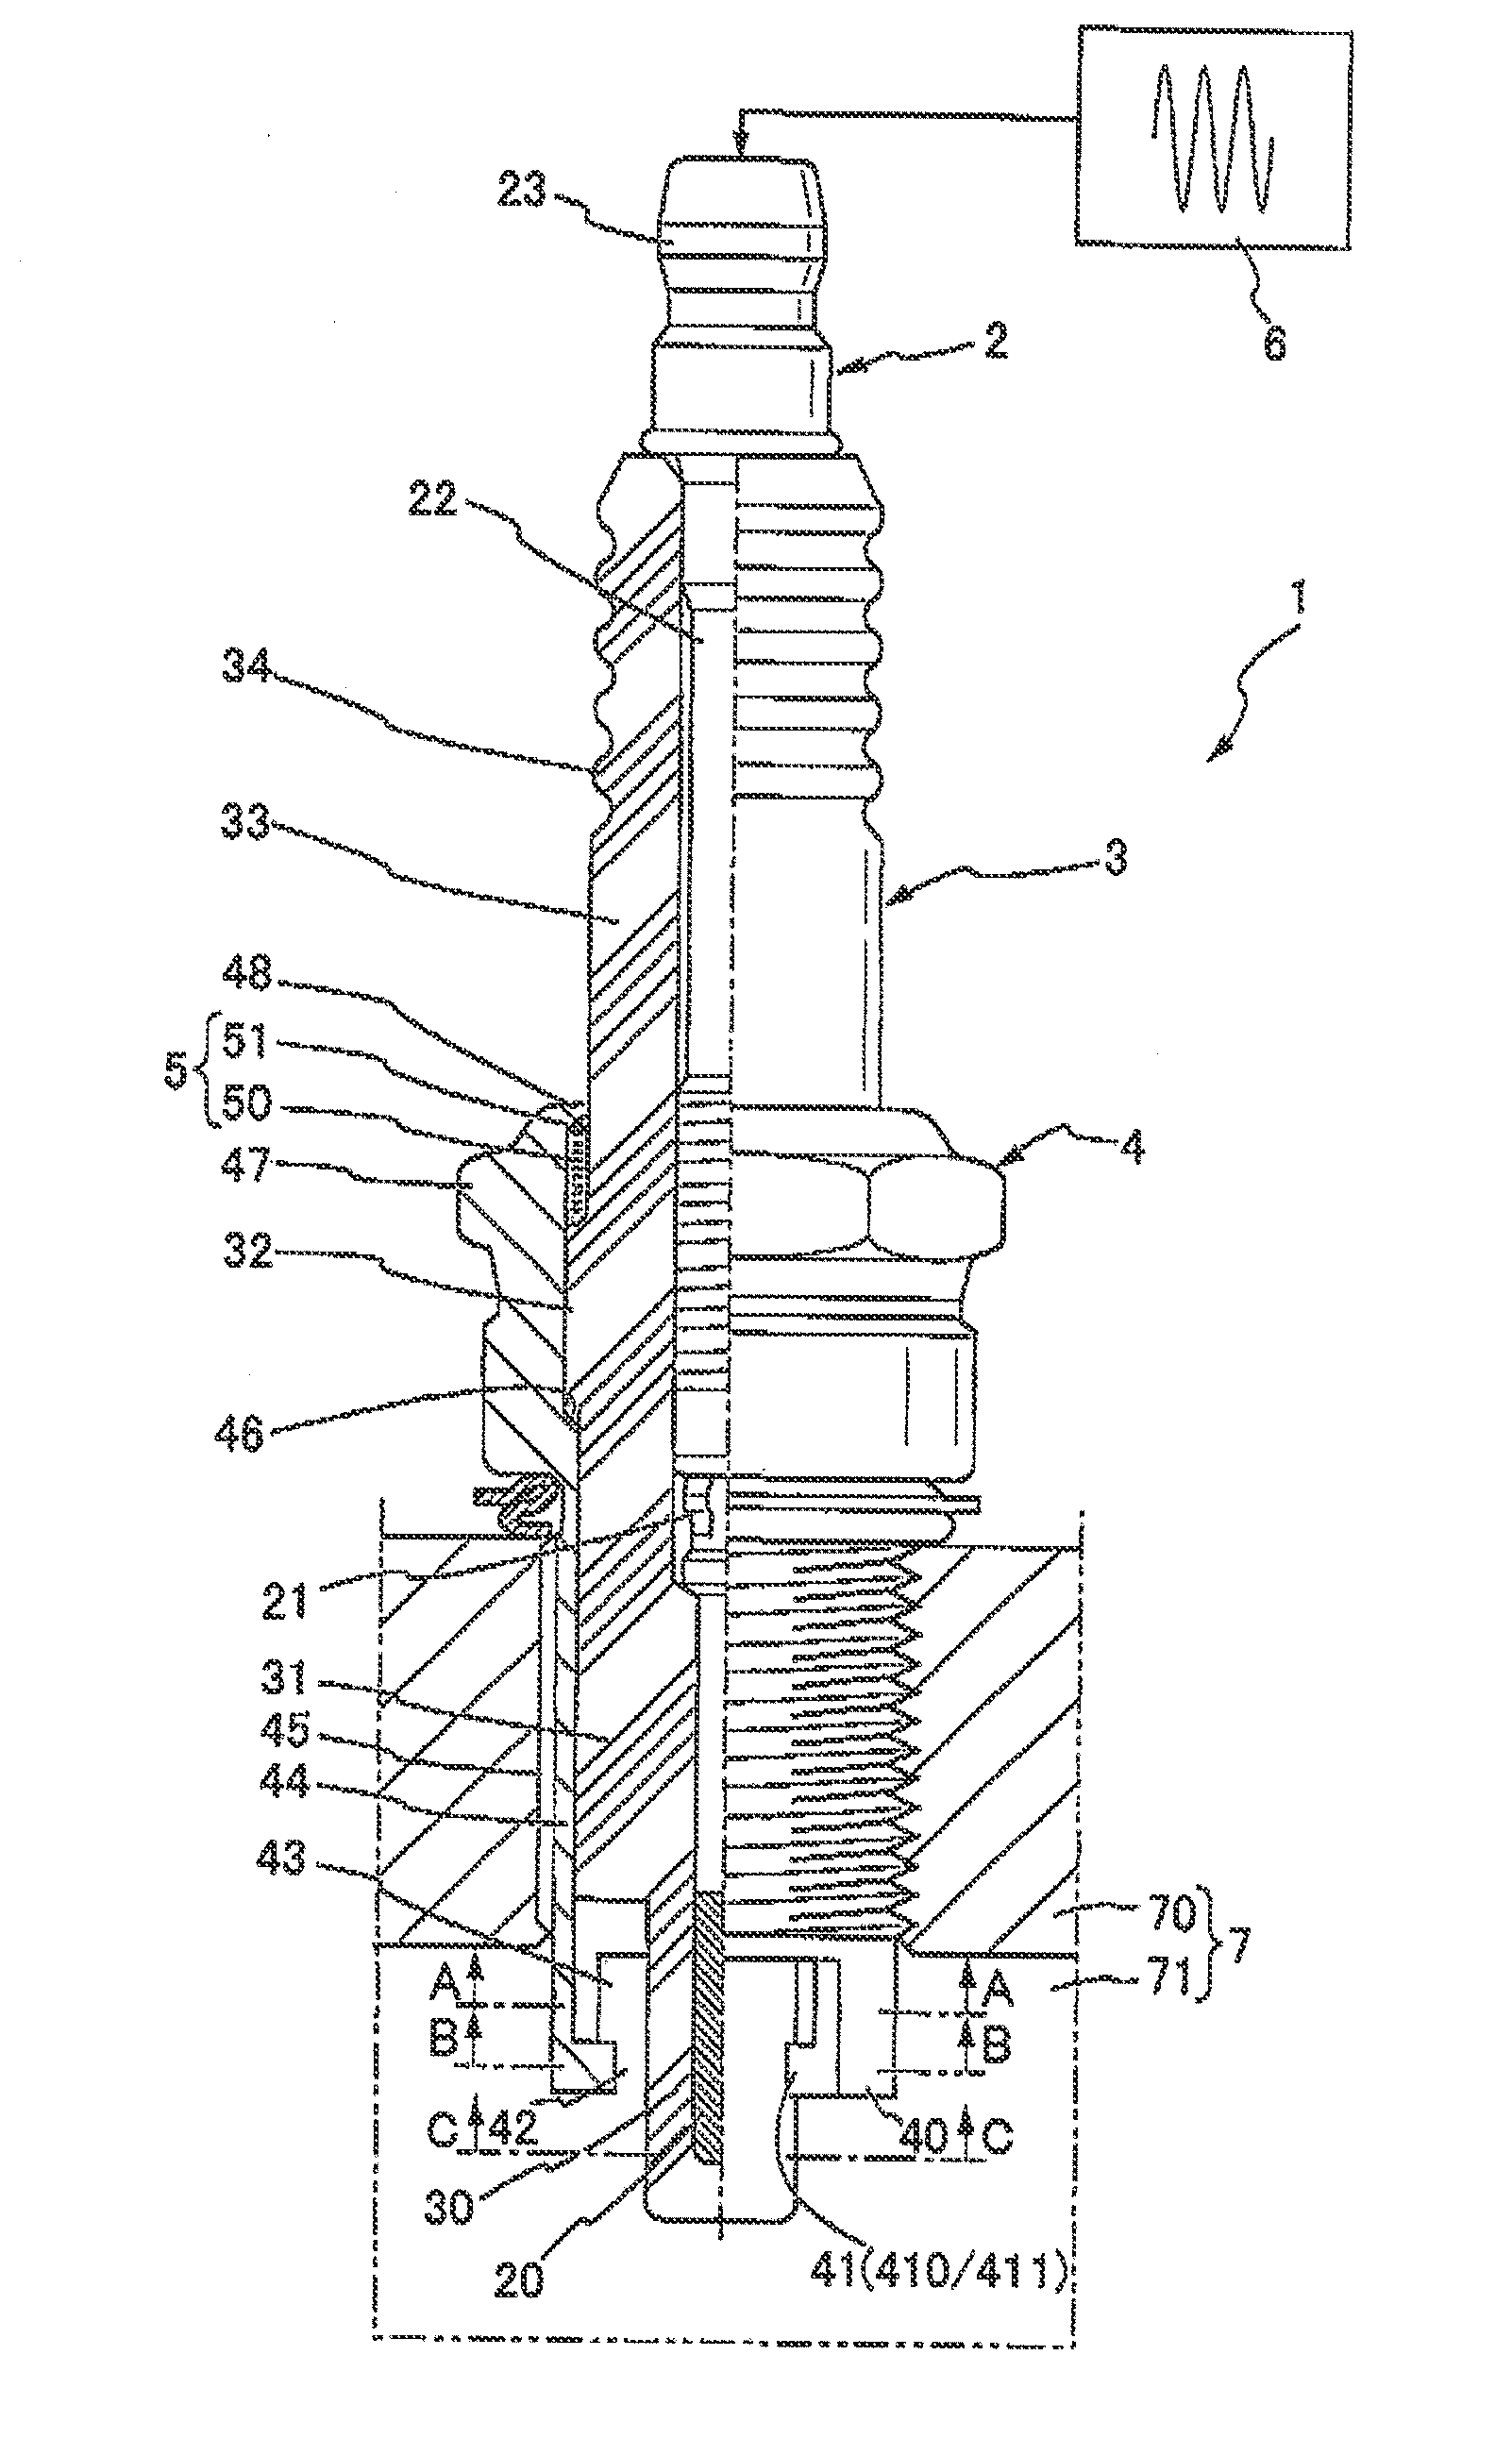 Ignition device